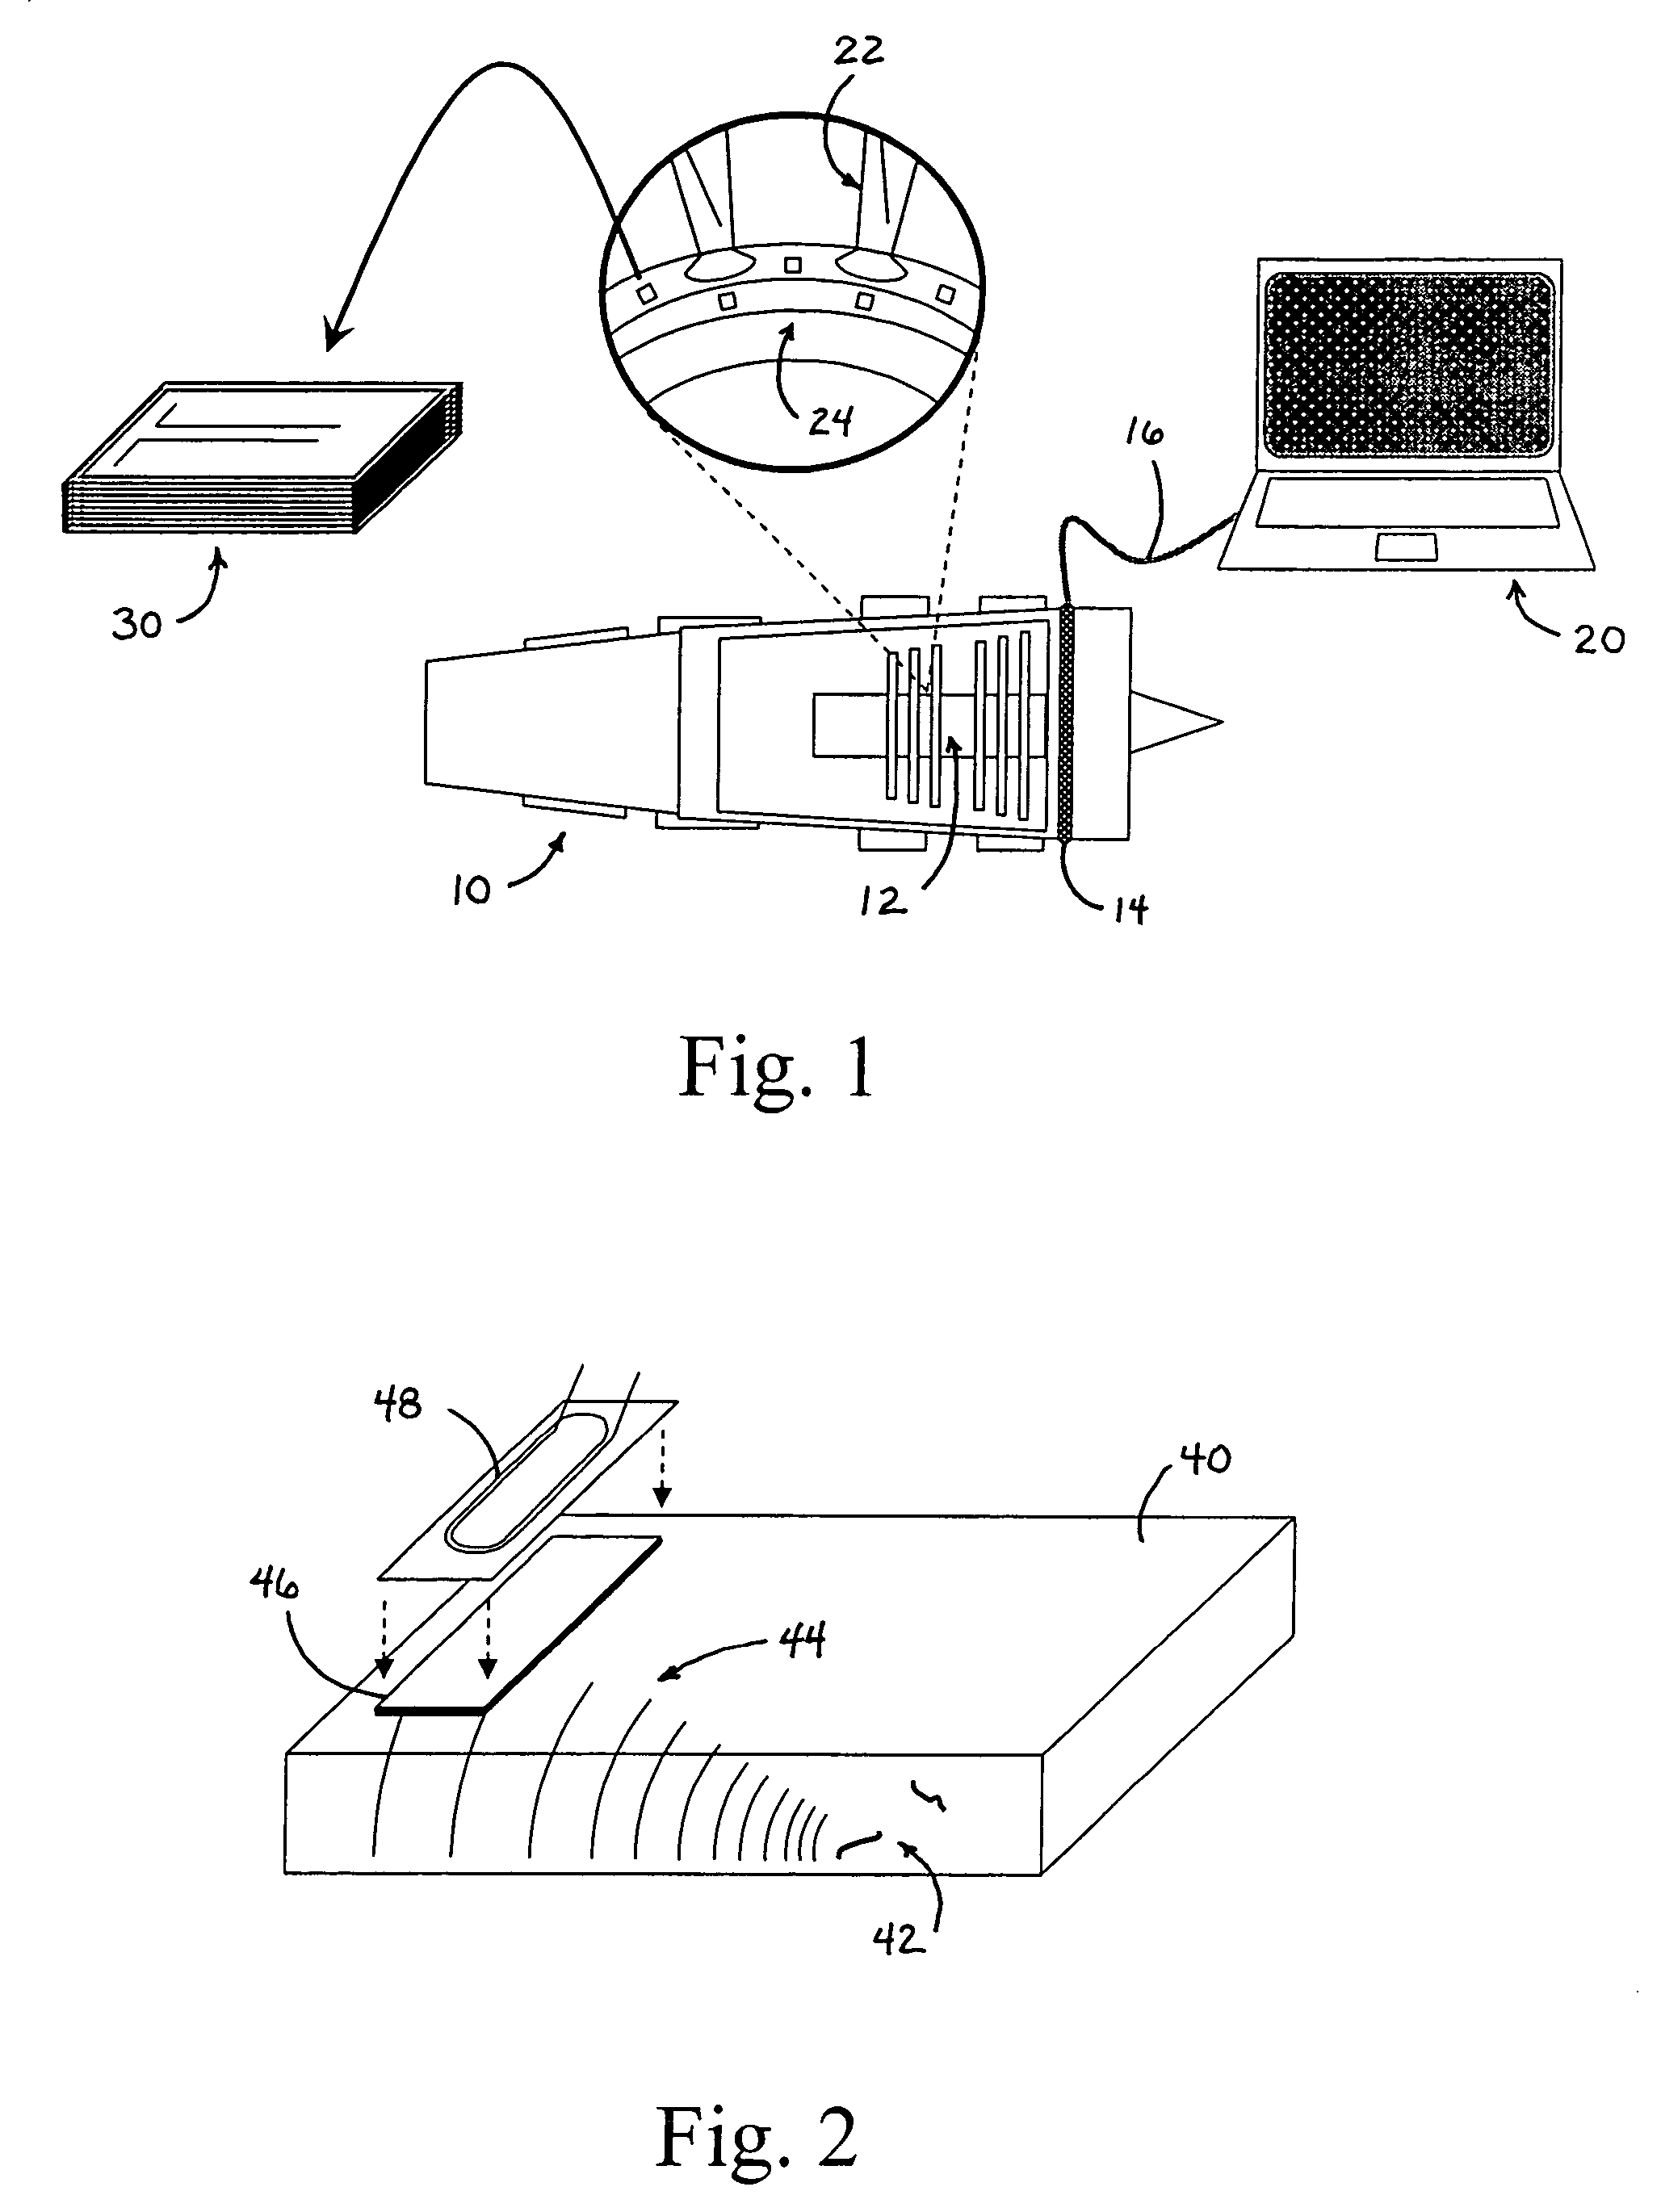 Systems and methods for flaw detection and monitoring at elevated temperatures with wireless communication using surface embedded, monolithically integrated, thin-film, magnetically actuated sensors, and methods for fabricating the sensors